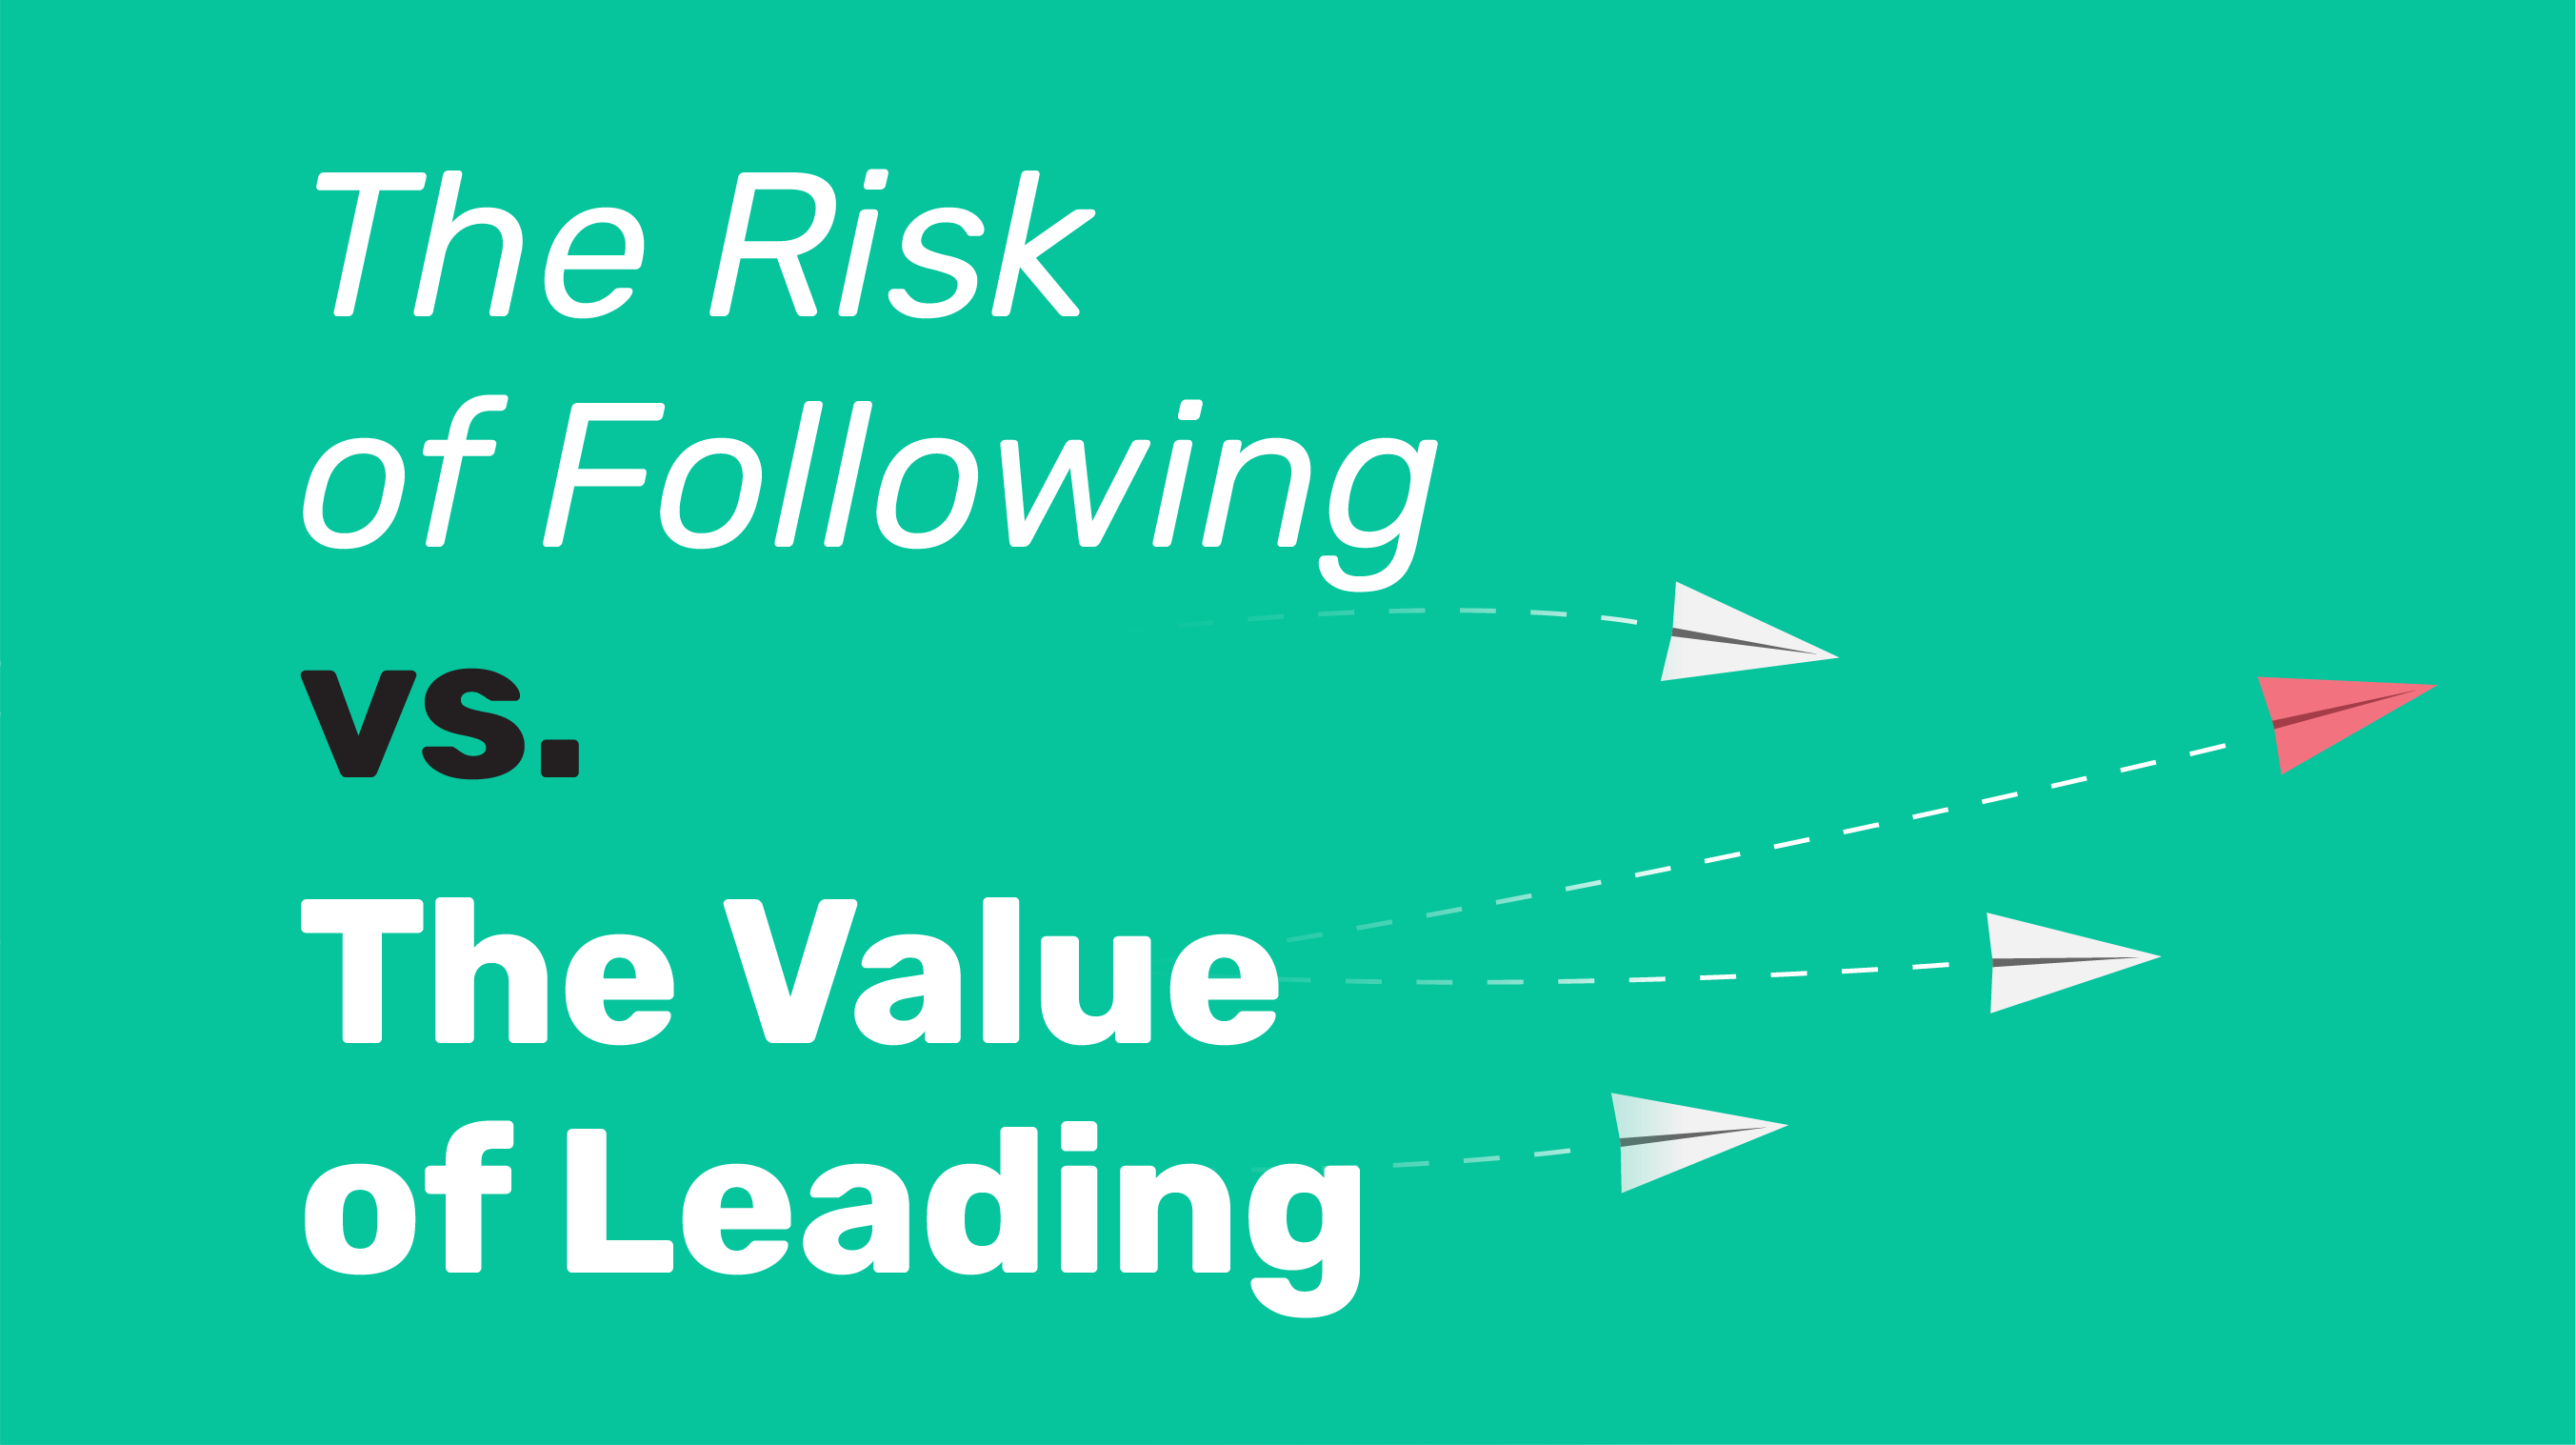 The Risk of Following vs. The Value of Leading